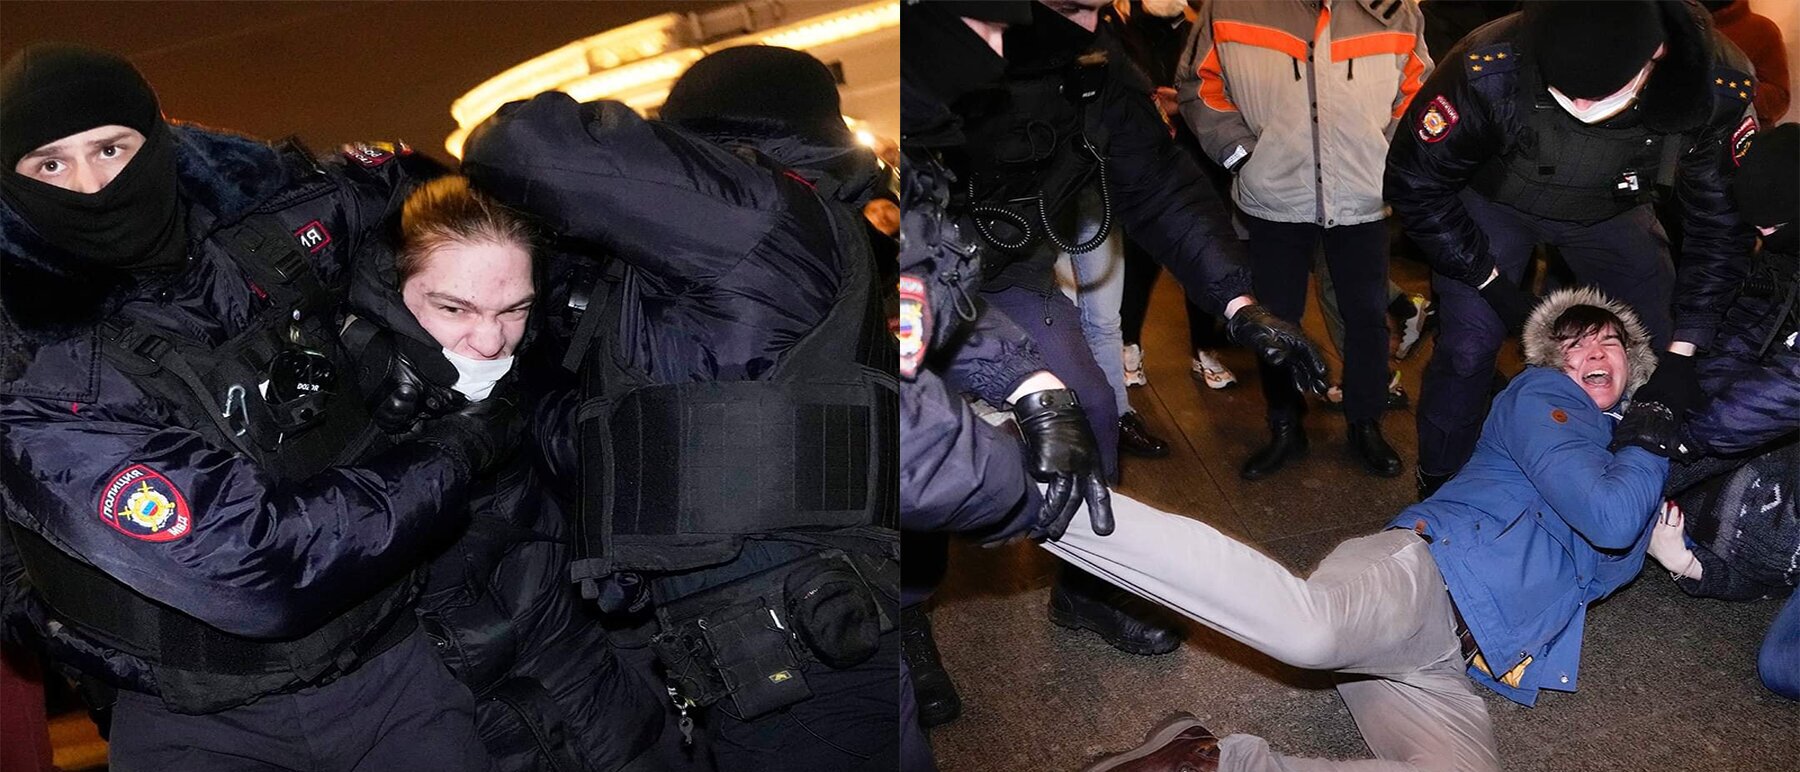 Russians-Are-Being-Detained-In-Russia-By-Russian-Police-For-Protesting-Against-Russia-Invasion...jpg